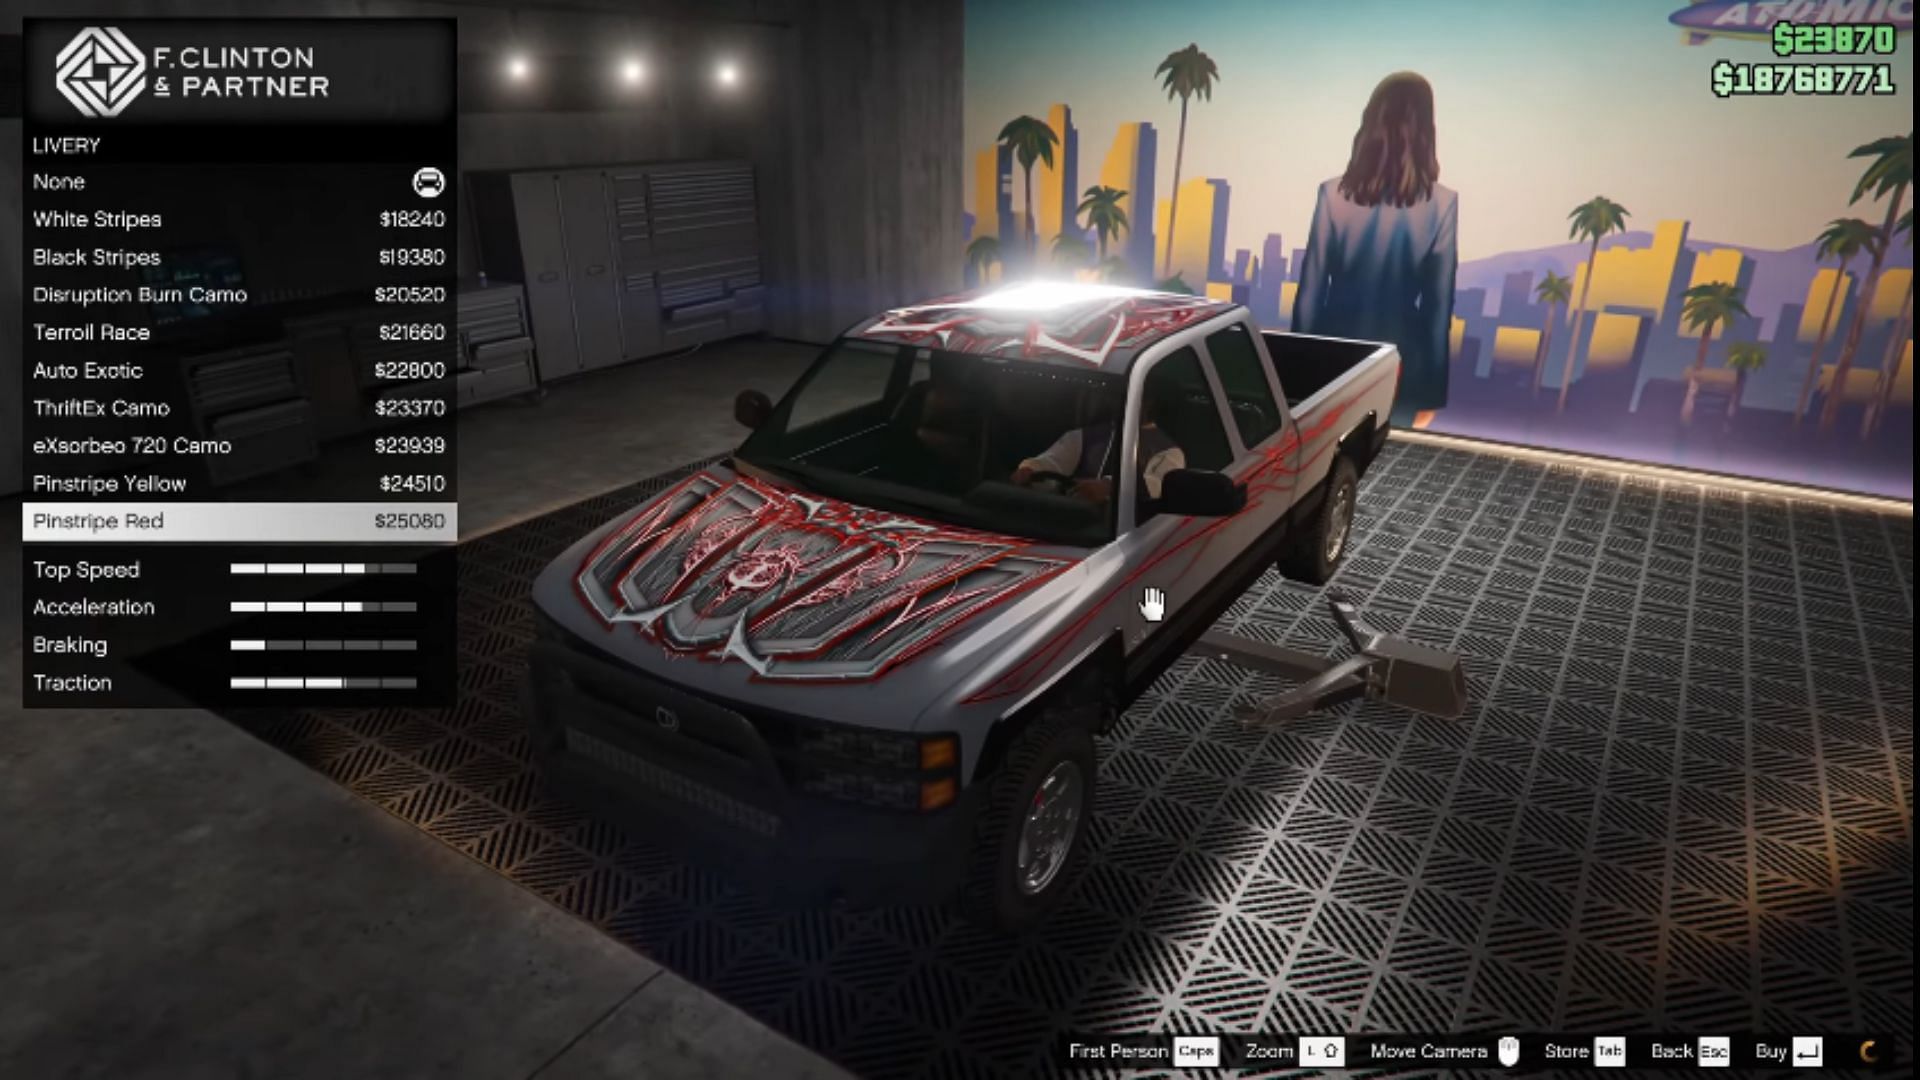 The new GTA Online Bottom Dollar Bounties car with Pinstripe Red livery (Image via YouTube/HarmNone)